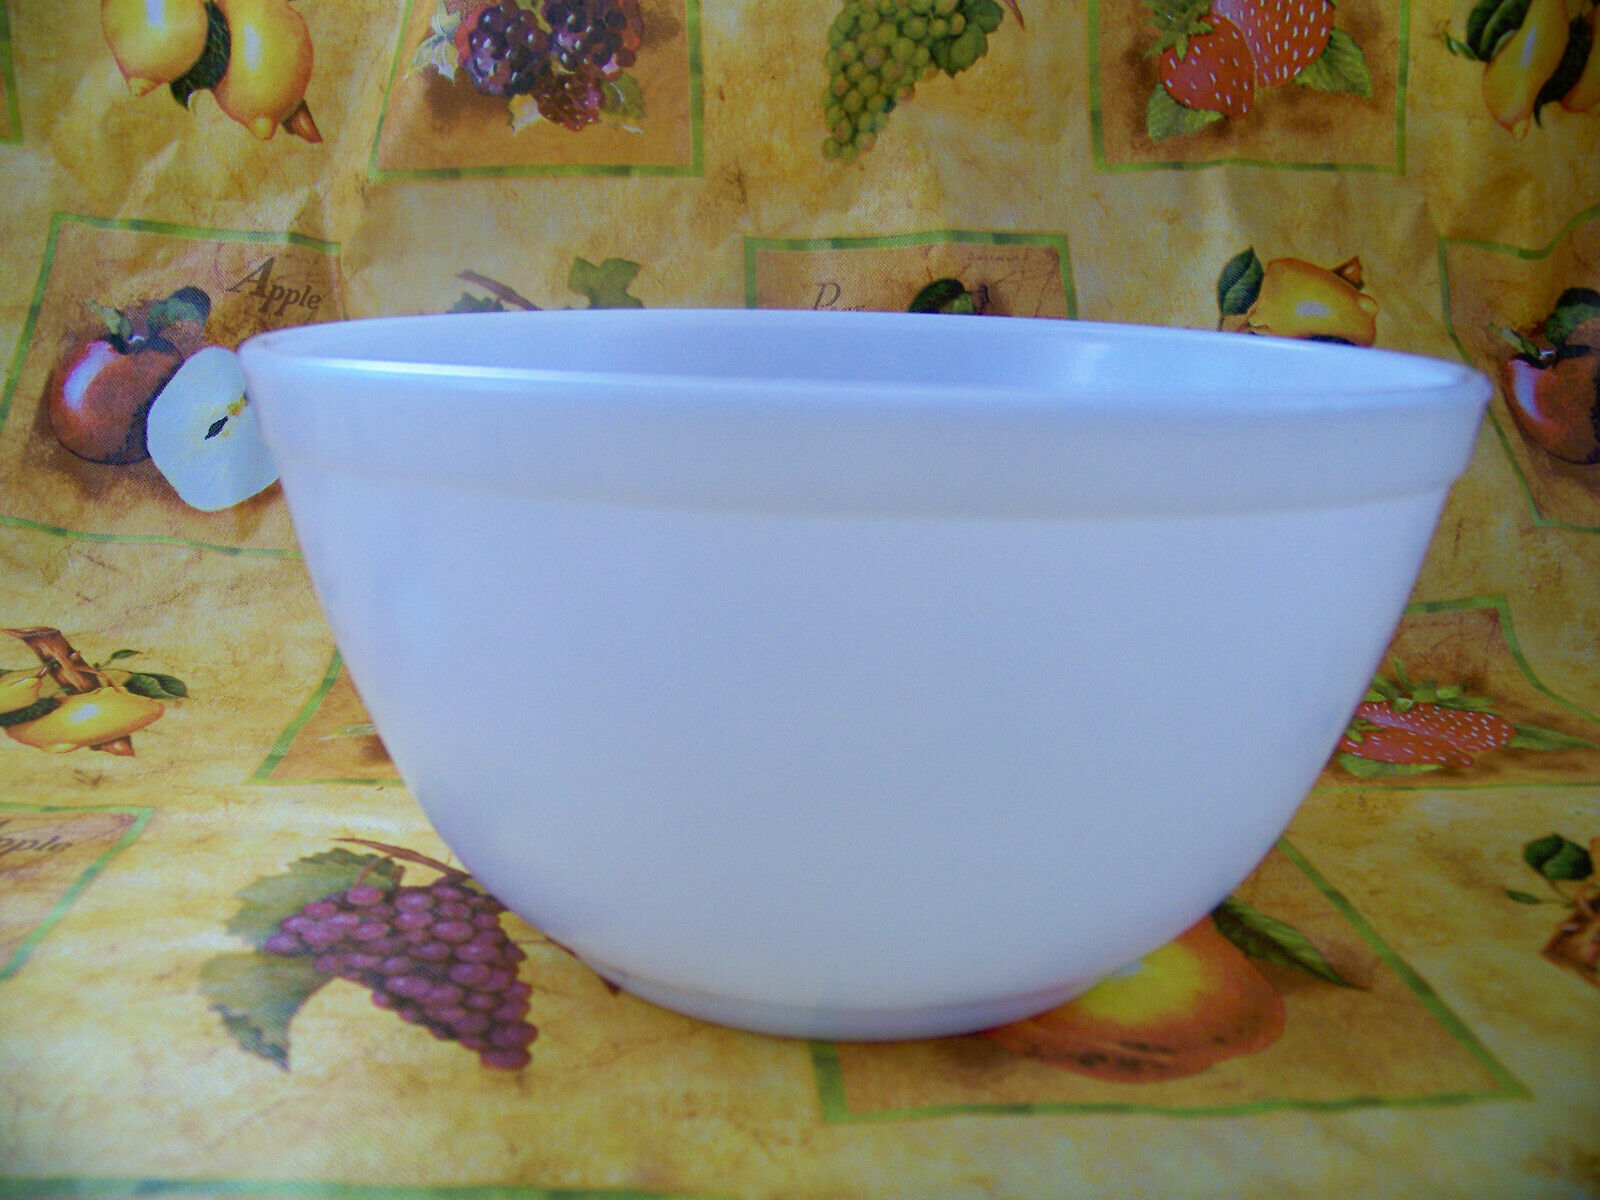 Primary image for Vintage Pyrex Milk Glass White Oven Ware Bowl Made in U.S.A.